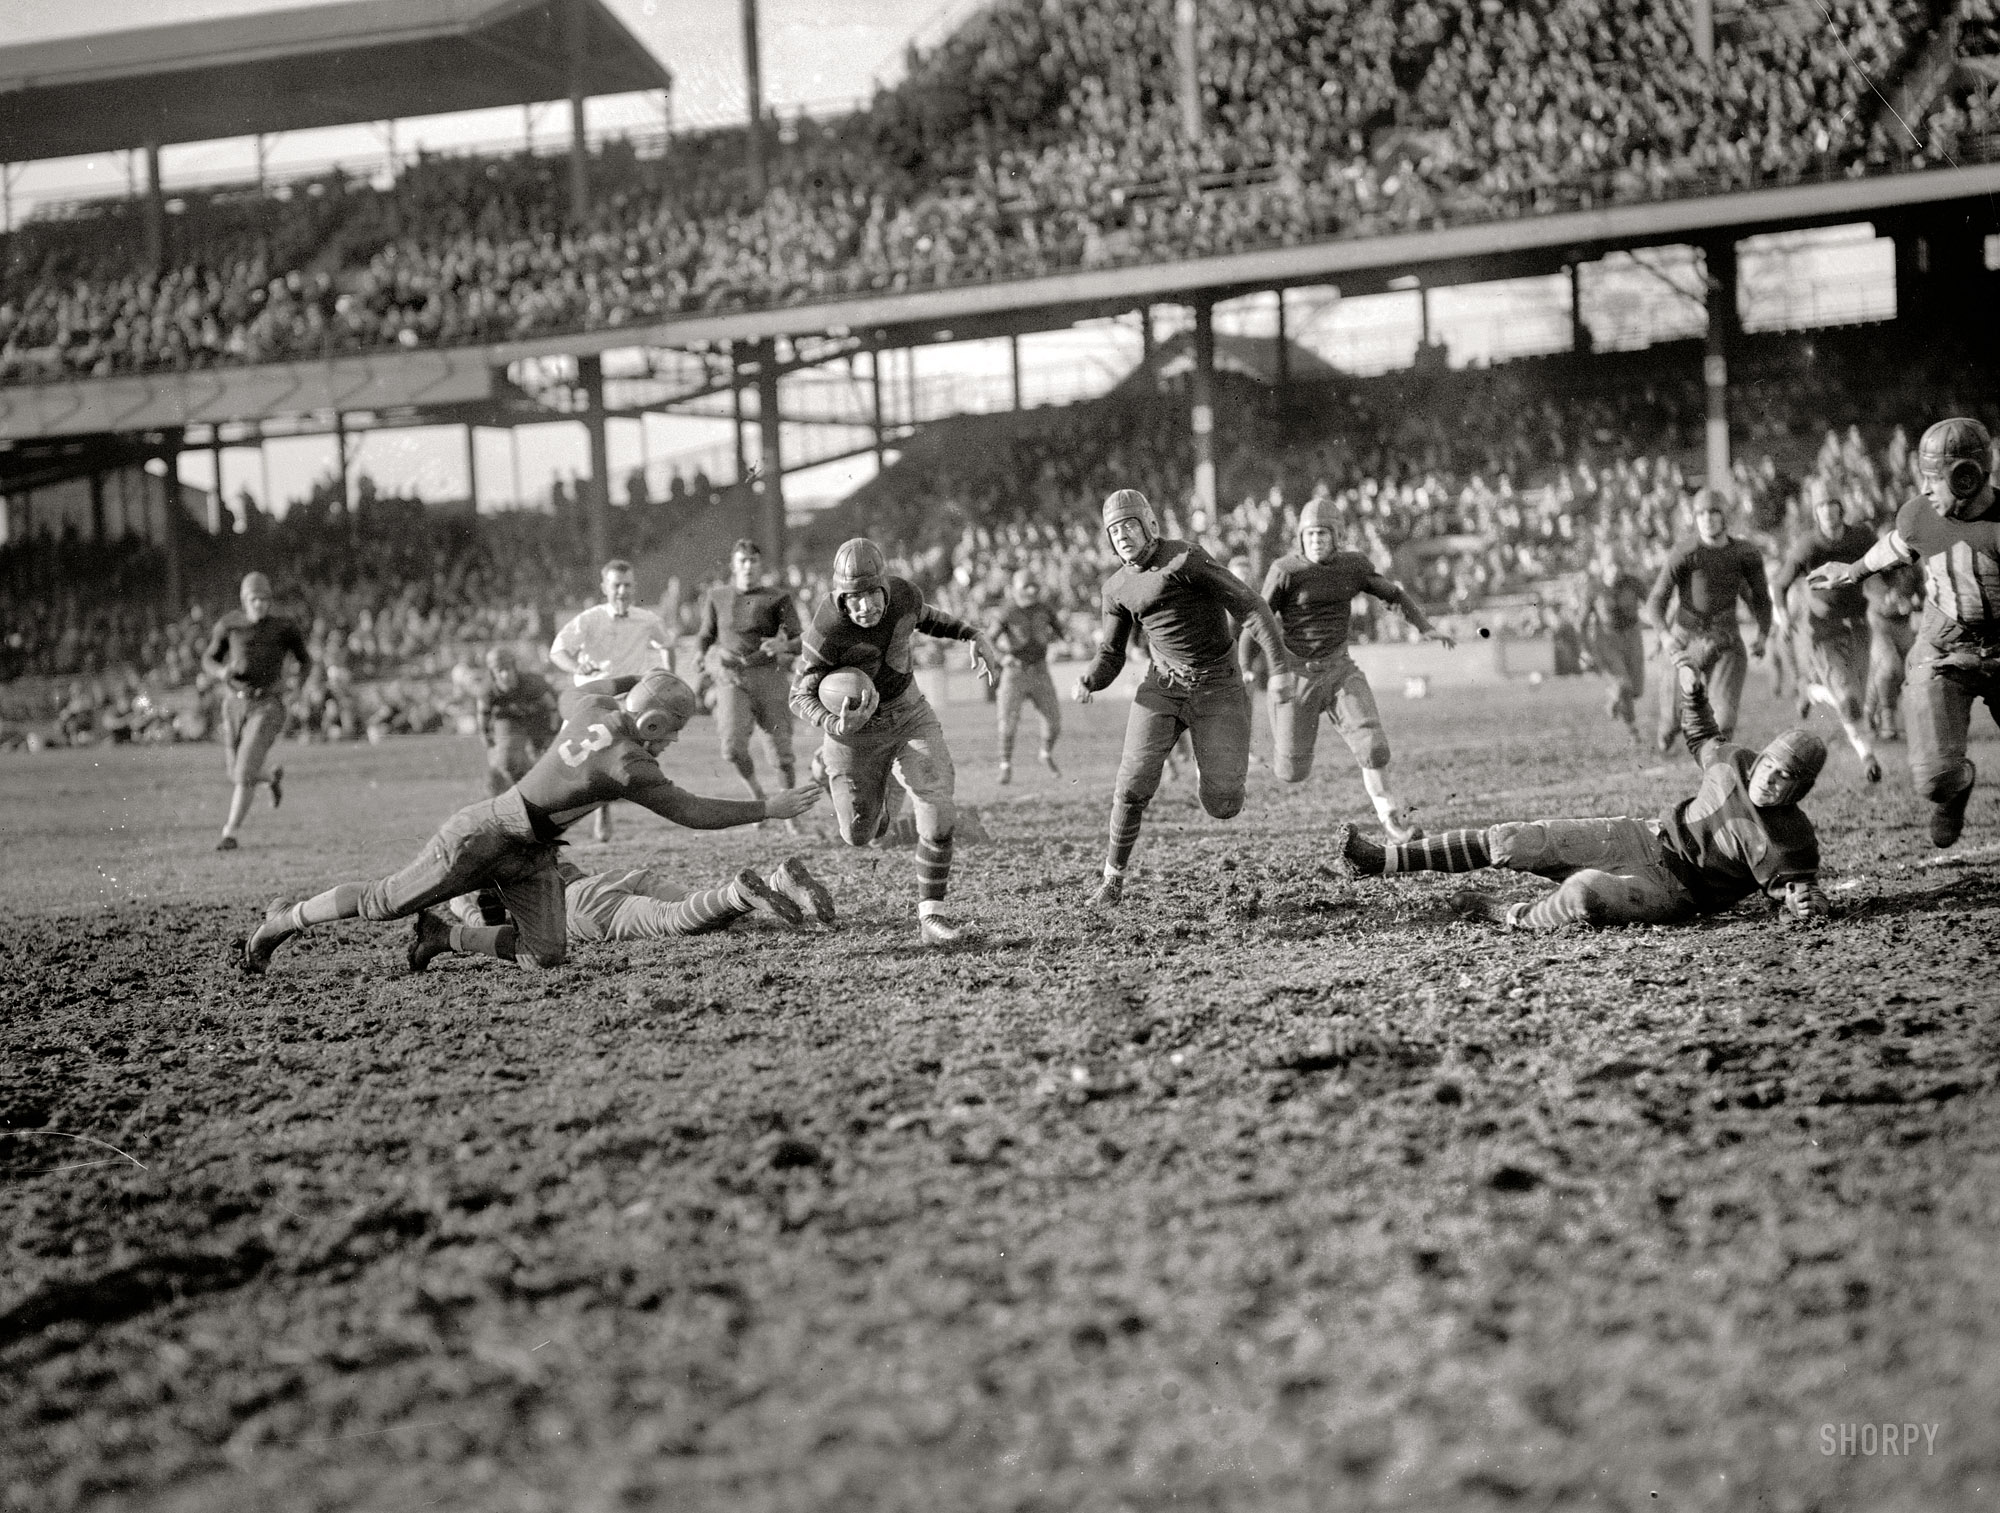 November 14, 1925. "Georgetown-Centre College game." Georgetown University takes on Kentucky's "Praying Colonels" at Griffith Stadium in Washington, D.C. National Photo Company Collection glass negative. View full size.